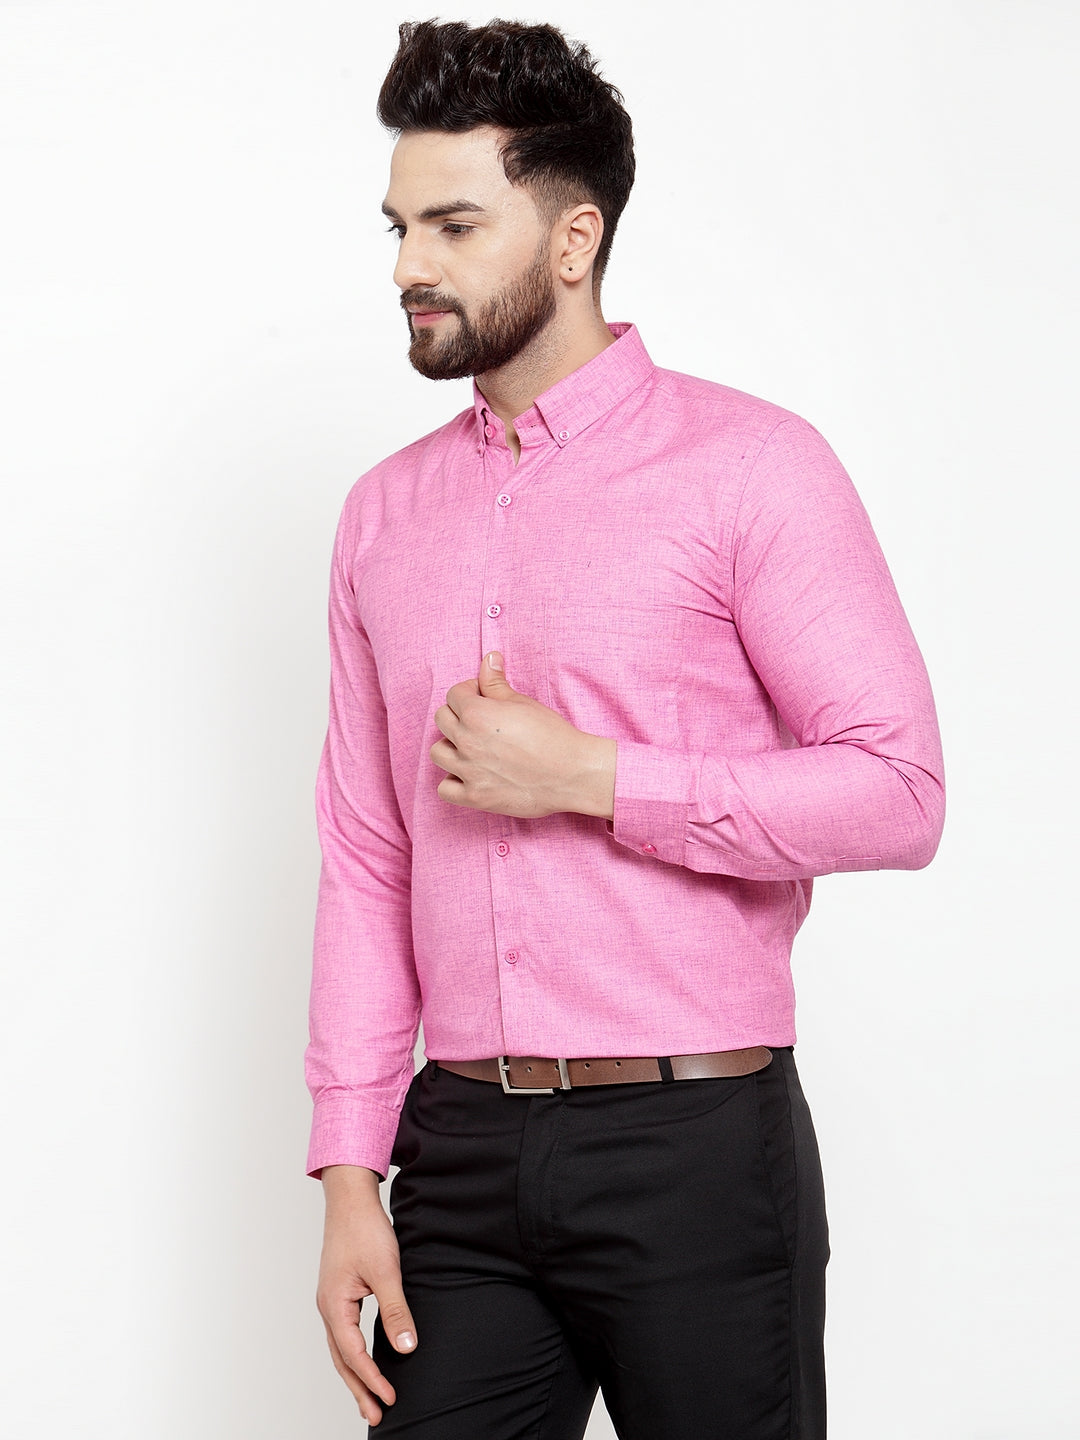 Men's Pink Cotton Solid Button Down Formal Shirts ( SF 753Pink ) - Jainish